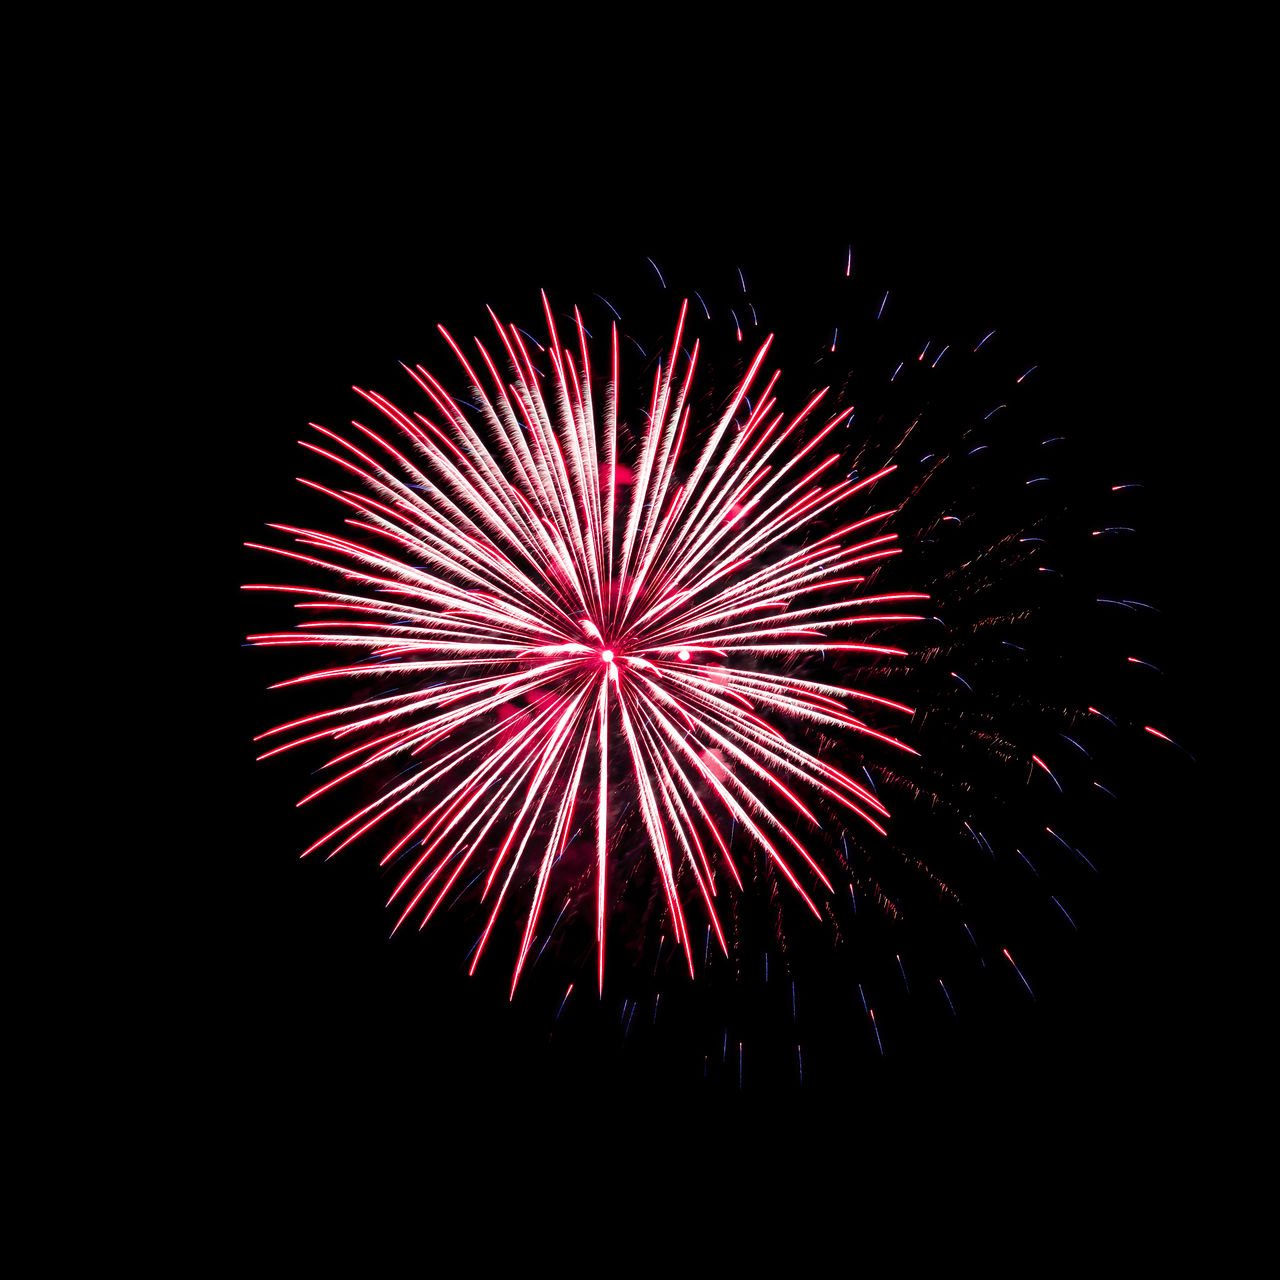 fireworks, exploding, firework display, celebration, motion, night, event, illuminated, arts culture and entertainment, no people, glowing, sky, firework - man made object, multi colored, long exposure, low angle view, nature, recreation, blurred motion, red, dark, outdoors, copy space, black